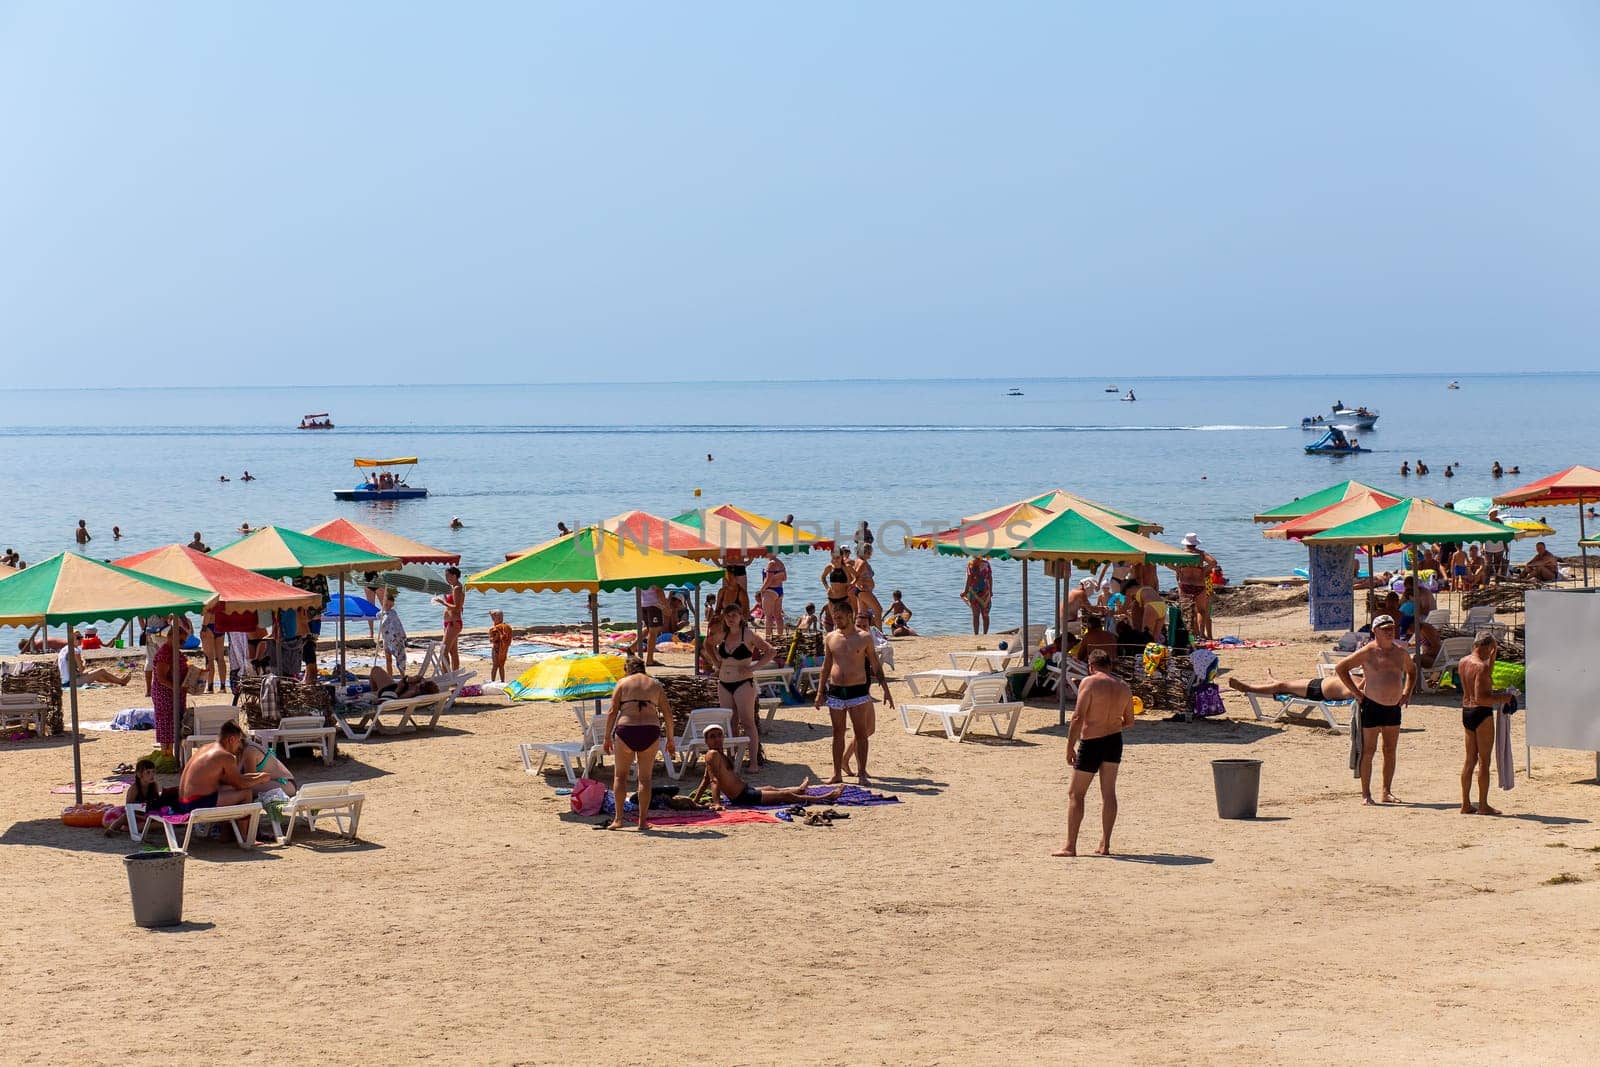 Skadovsk, Ukraine - August 15, 2018: People on beach in the Black Sea before the War. Rest on the city beaches of Skadovsk. Rows of canopies with sun beds for relaxing and sunbathing.